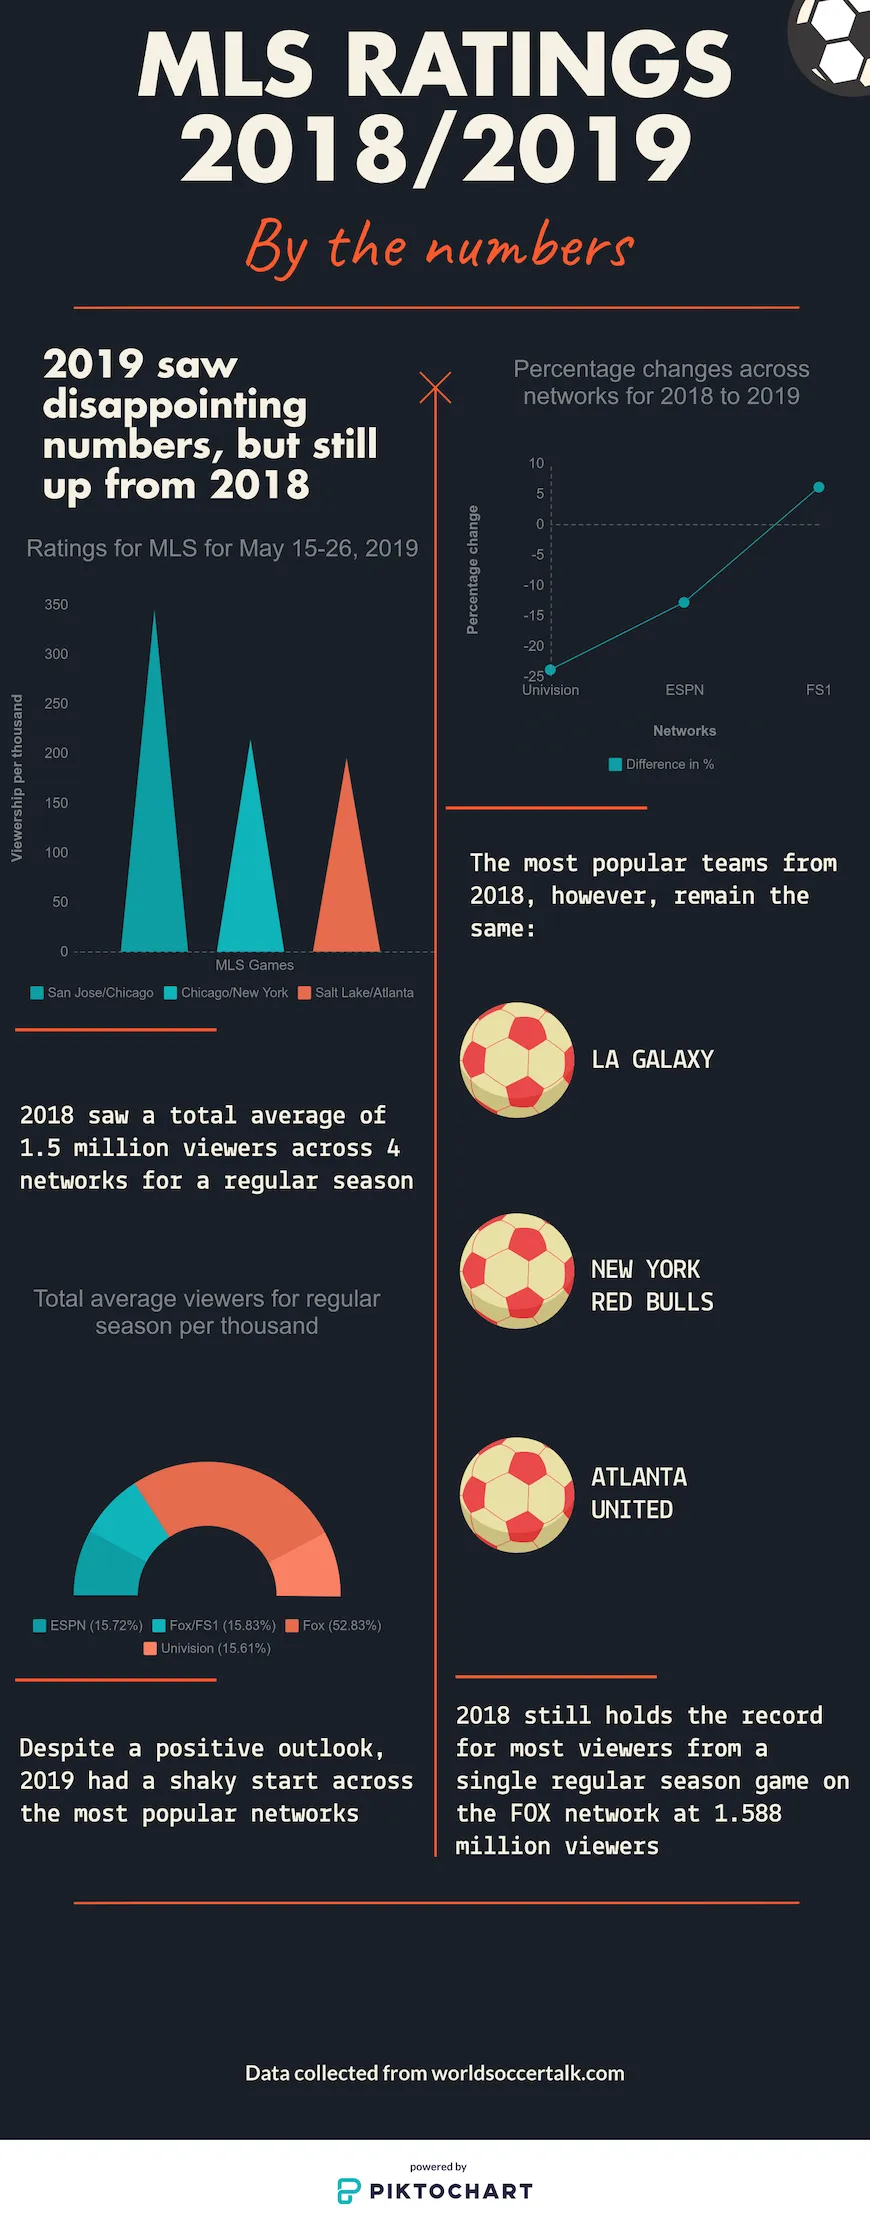 MLS ratings 2018 - 2019 infographic